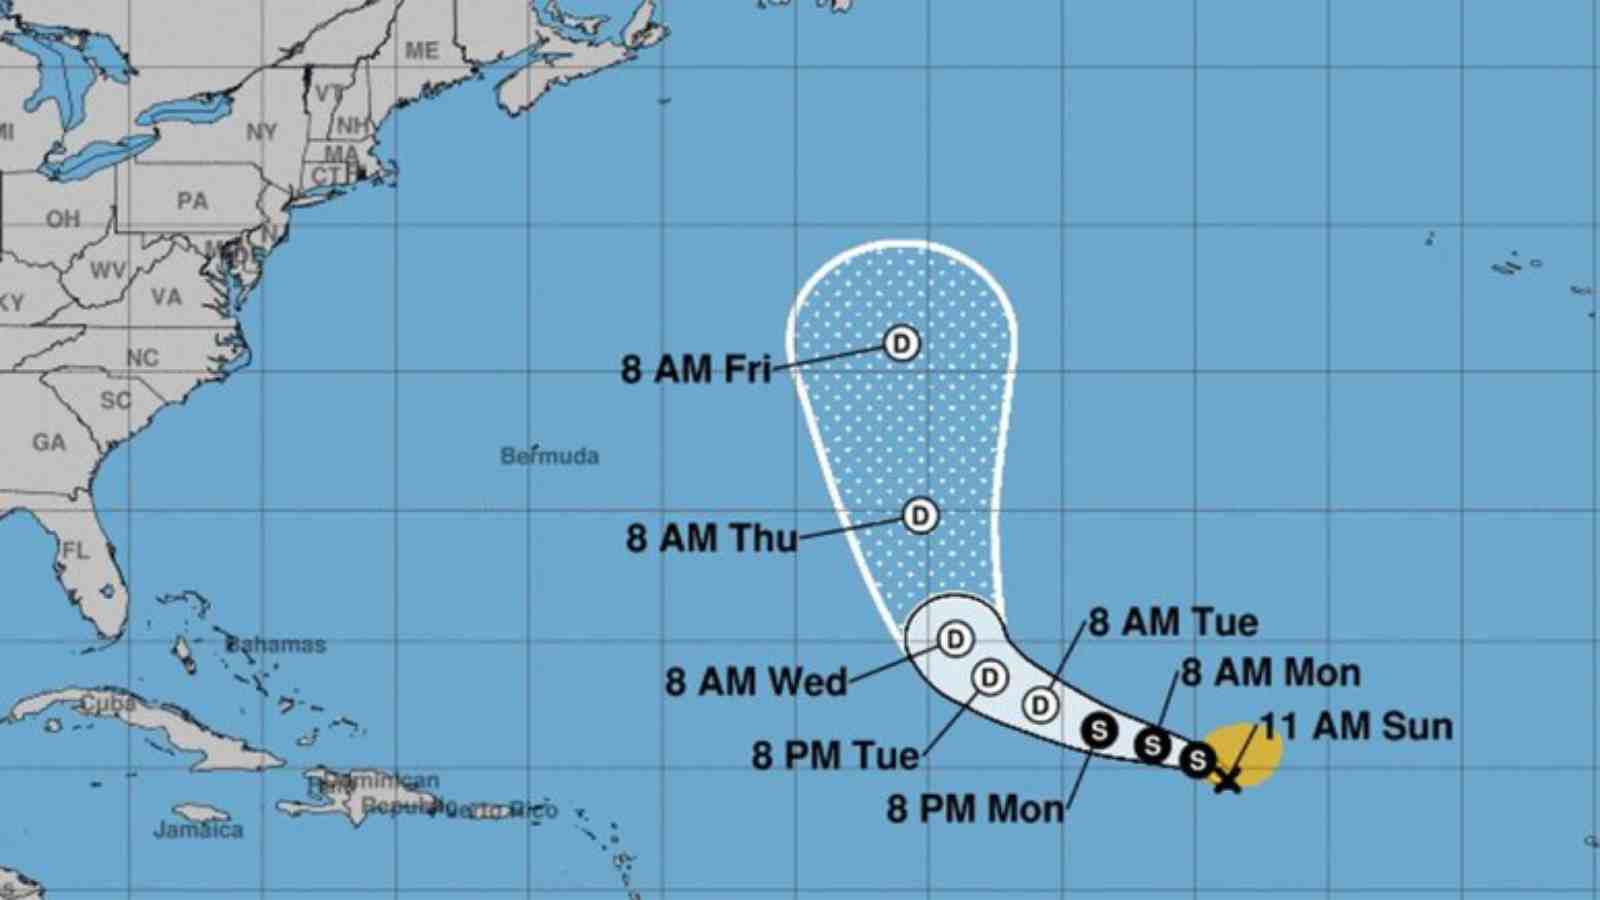 Tropical Storm Emily: Check the updates from Atlantic